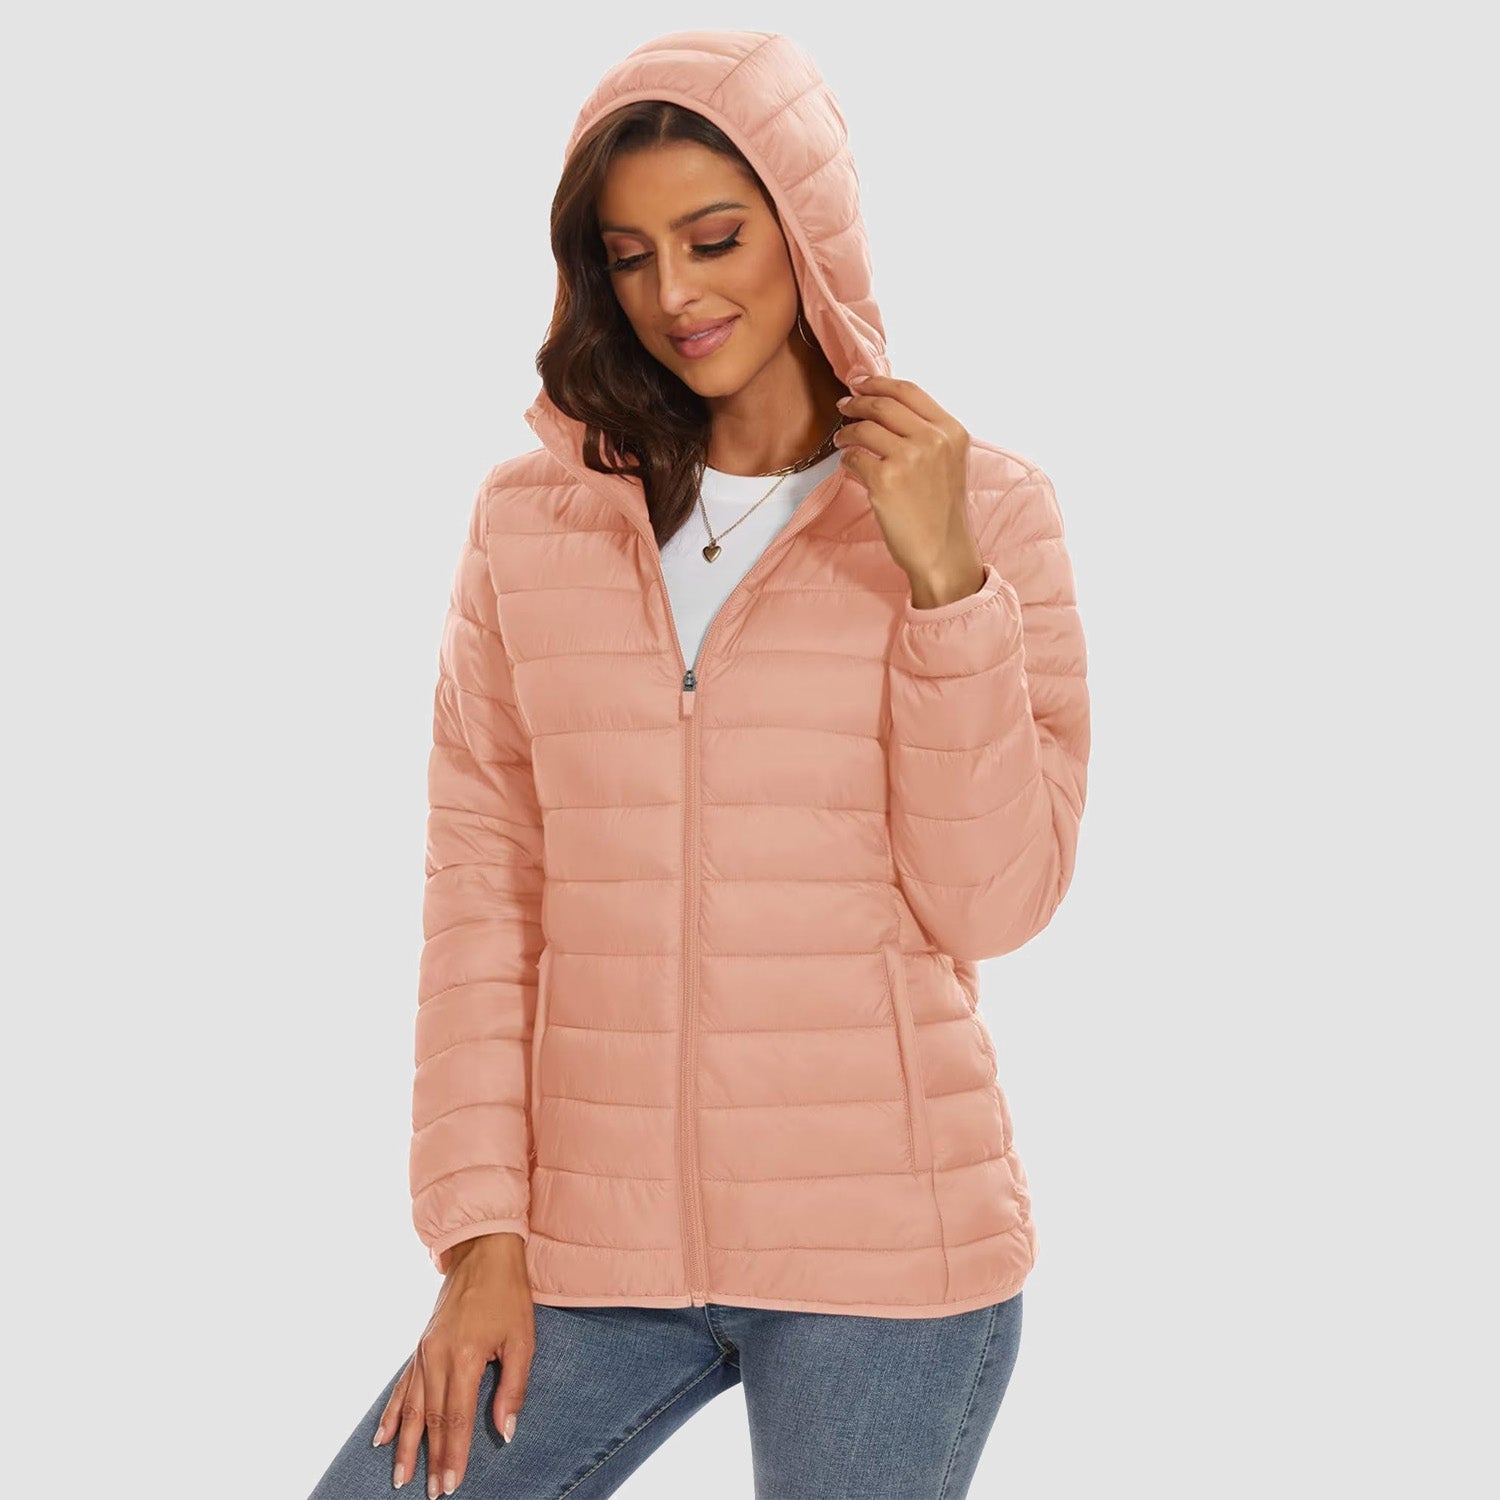 Women's Lightweight Puffer Jacket Hooded Full Zip Quilted Lined Coat for Winter